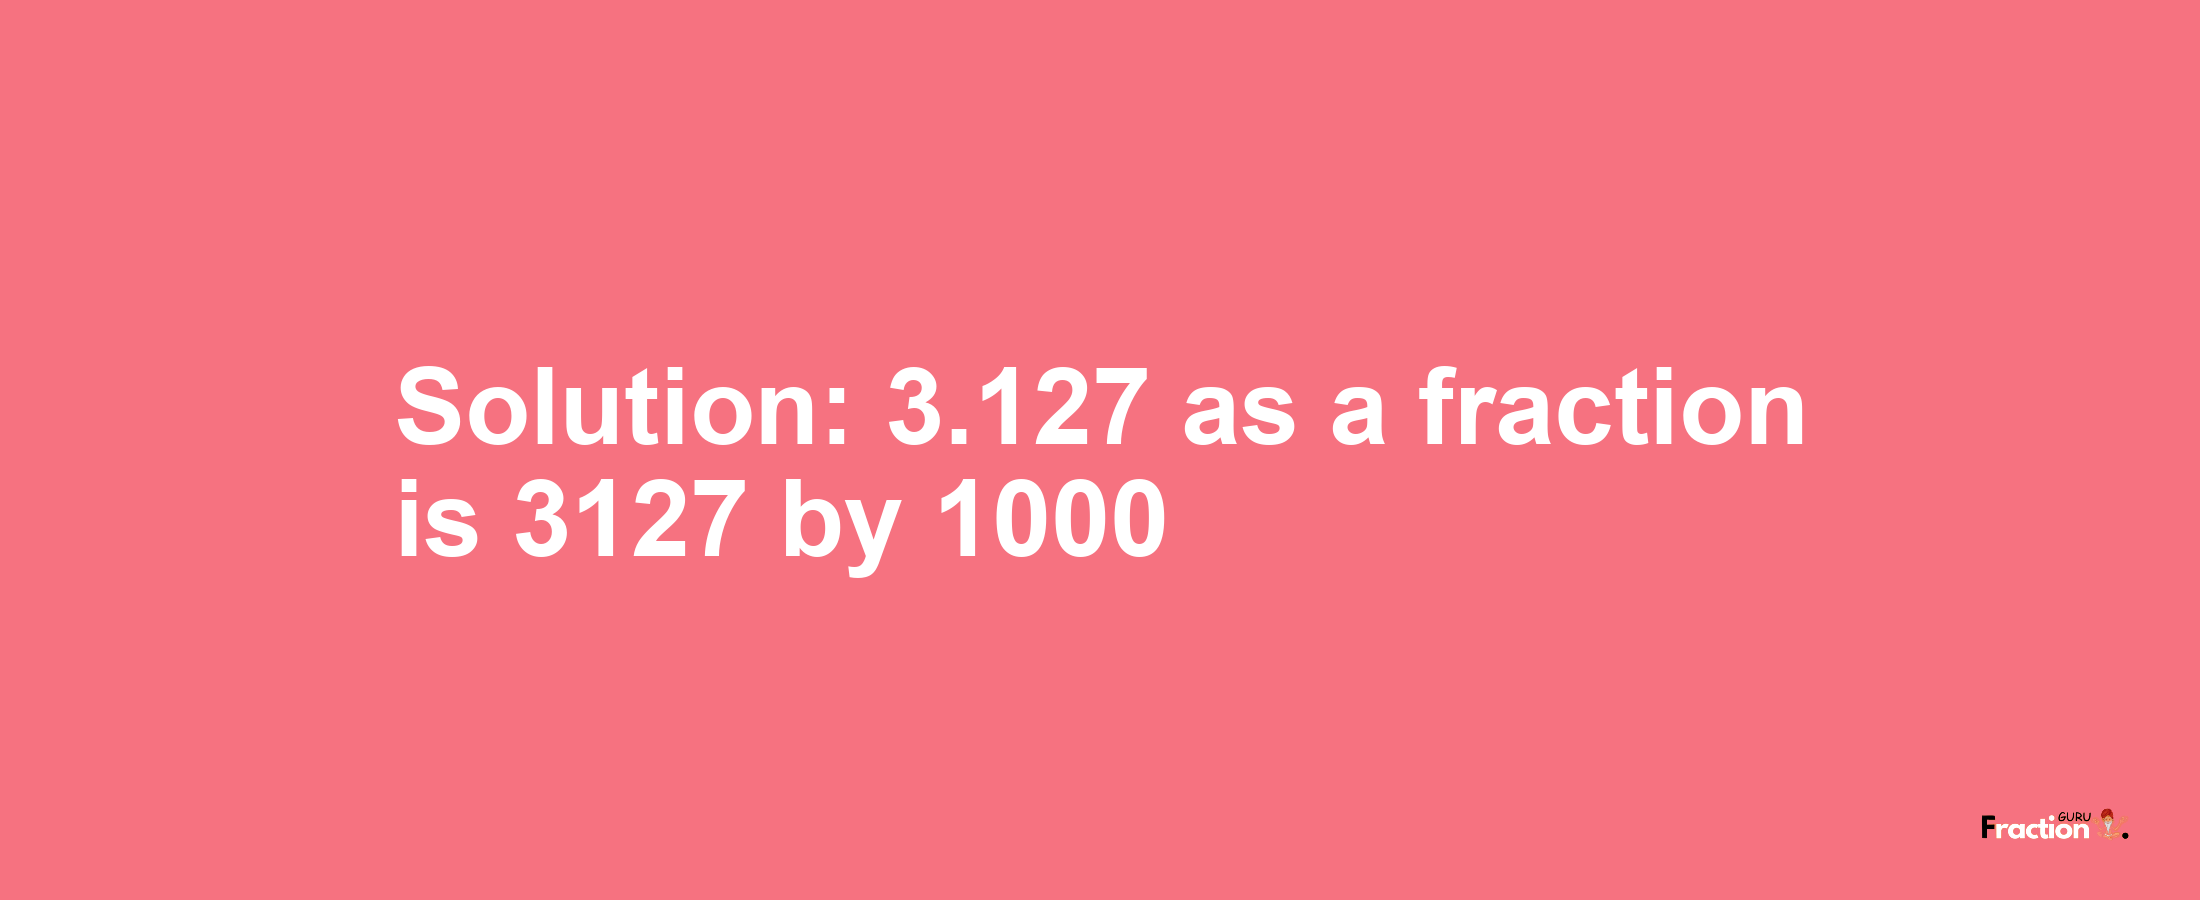 Solution:3.127 as a fraction is 3127/1000